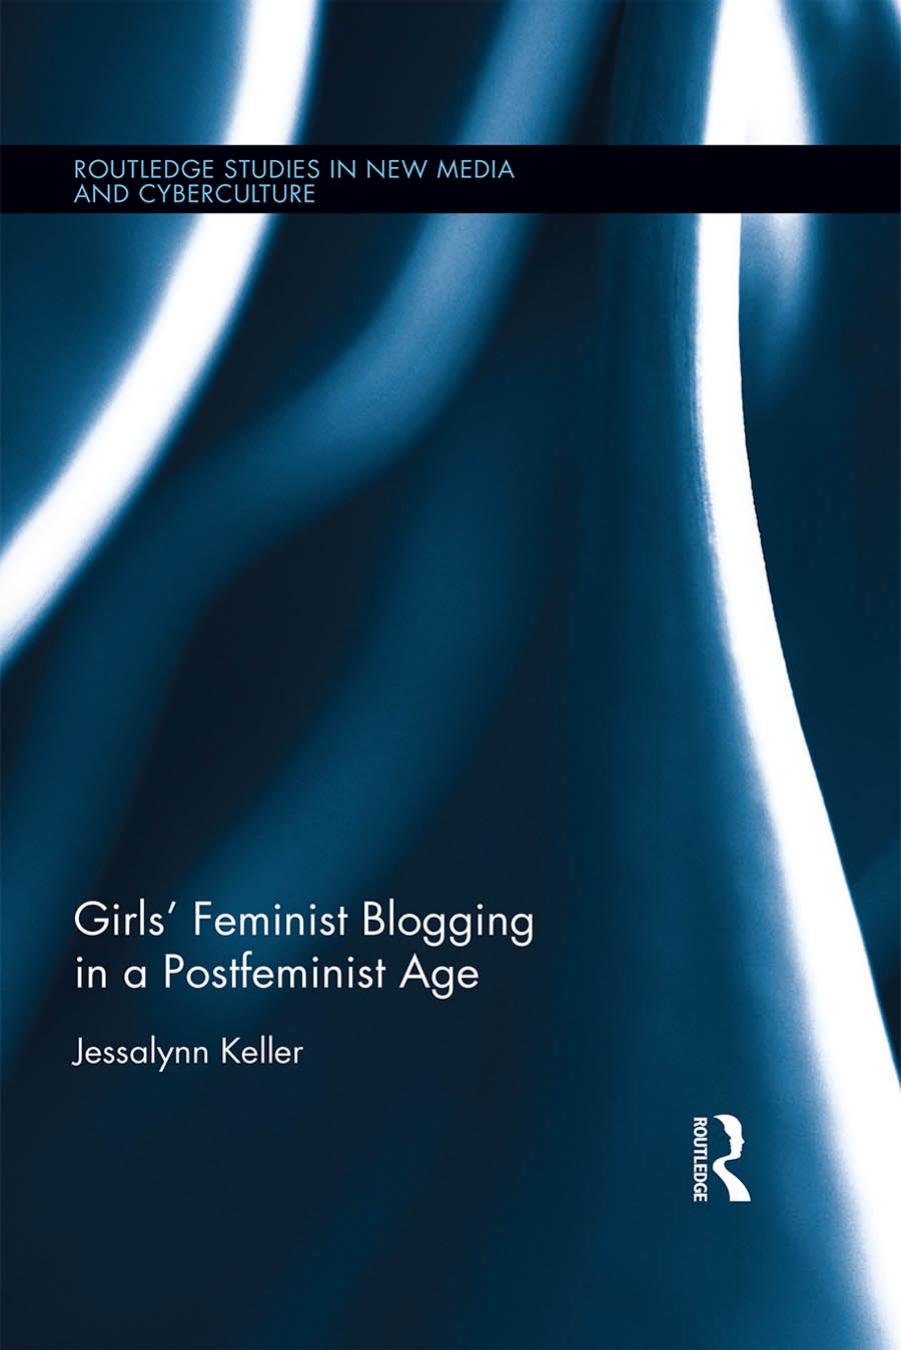 Girls  Feminist Blogging in a Postfeminist Age (Routledge Studiedia and Cyberculture Book 30) 1st Edition by Keller, Jessalynn;